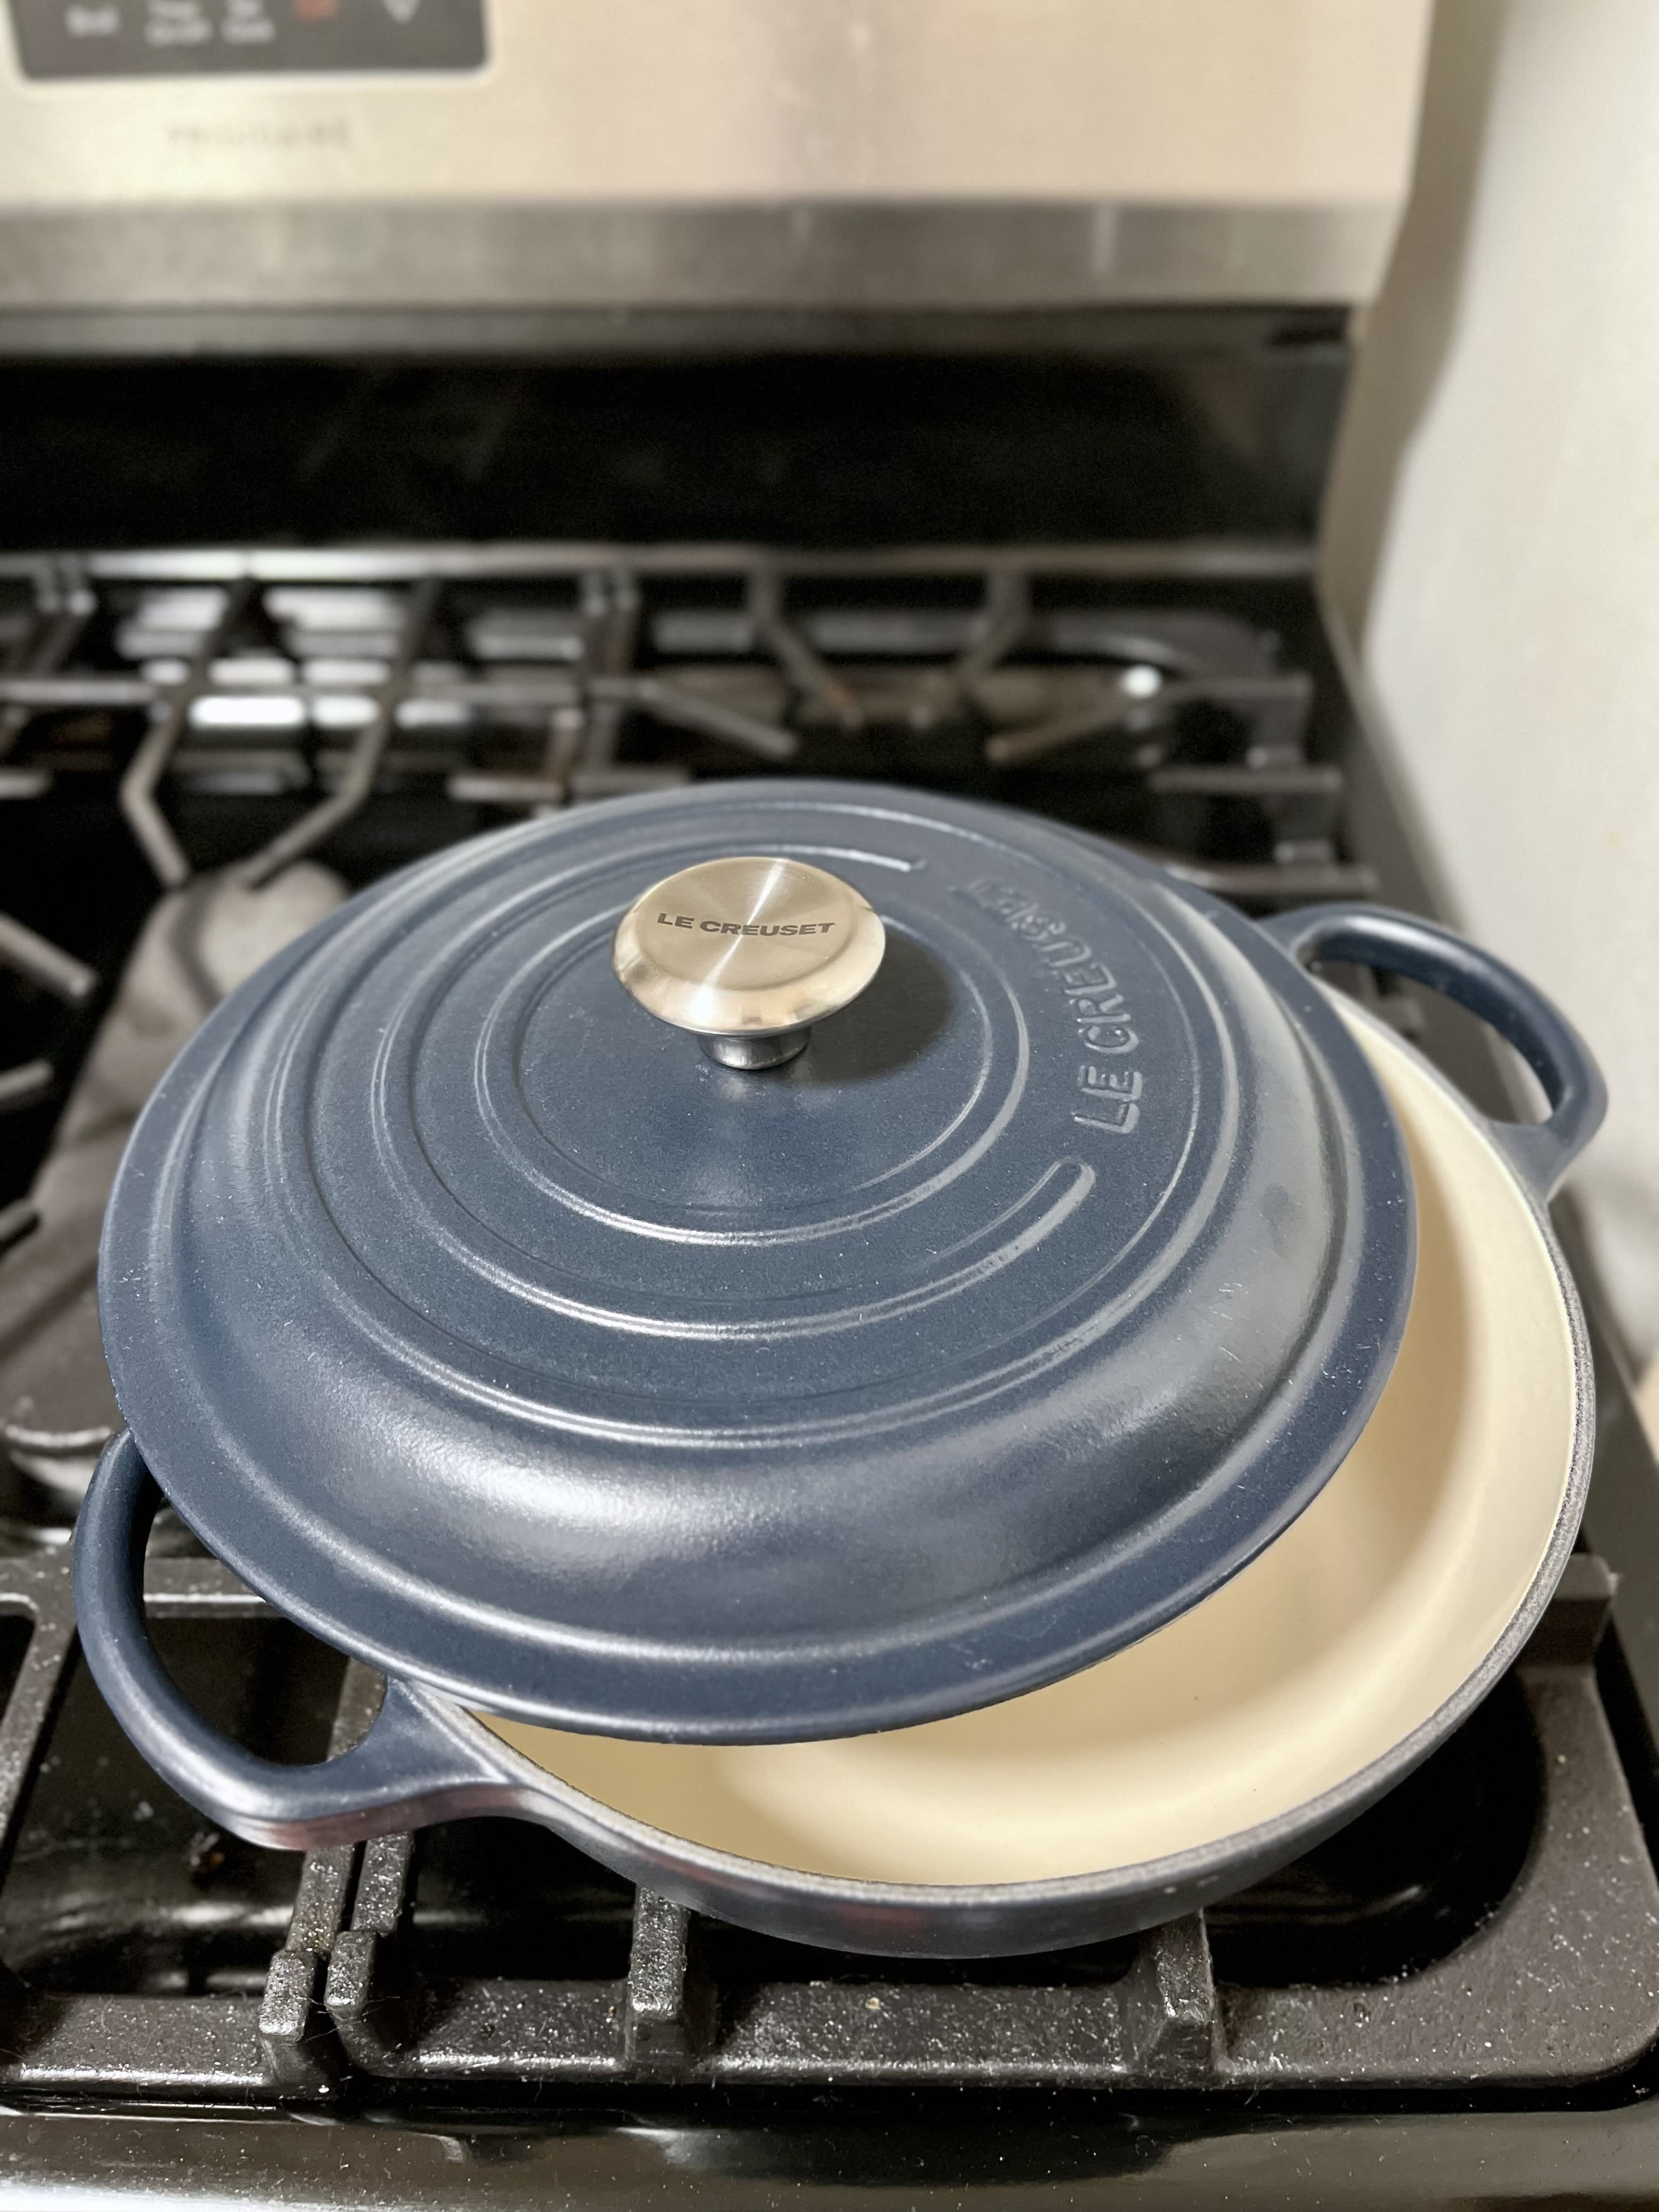 Le Creuset 5.5 Quart Round Dutch Oven — Review and Information. 